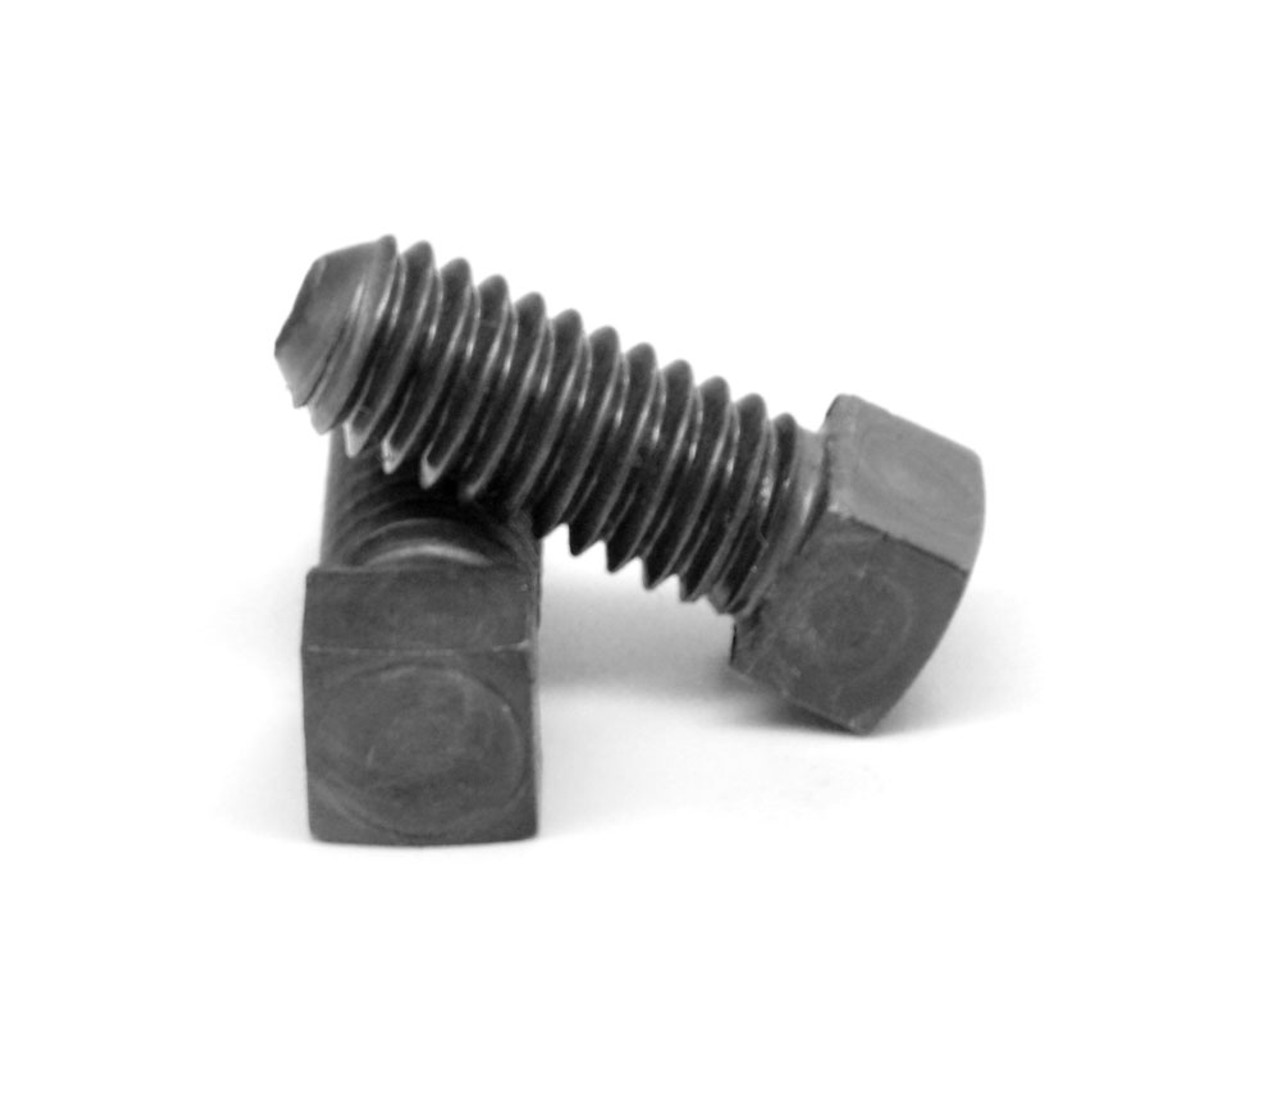 1/2"-13 x 2 1/2" (FT) Coarse Thread Square Head Set Screw Cup Point Through Hardened Alloy Steel Plain Finish